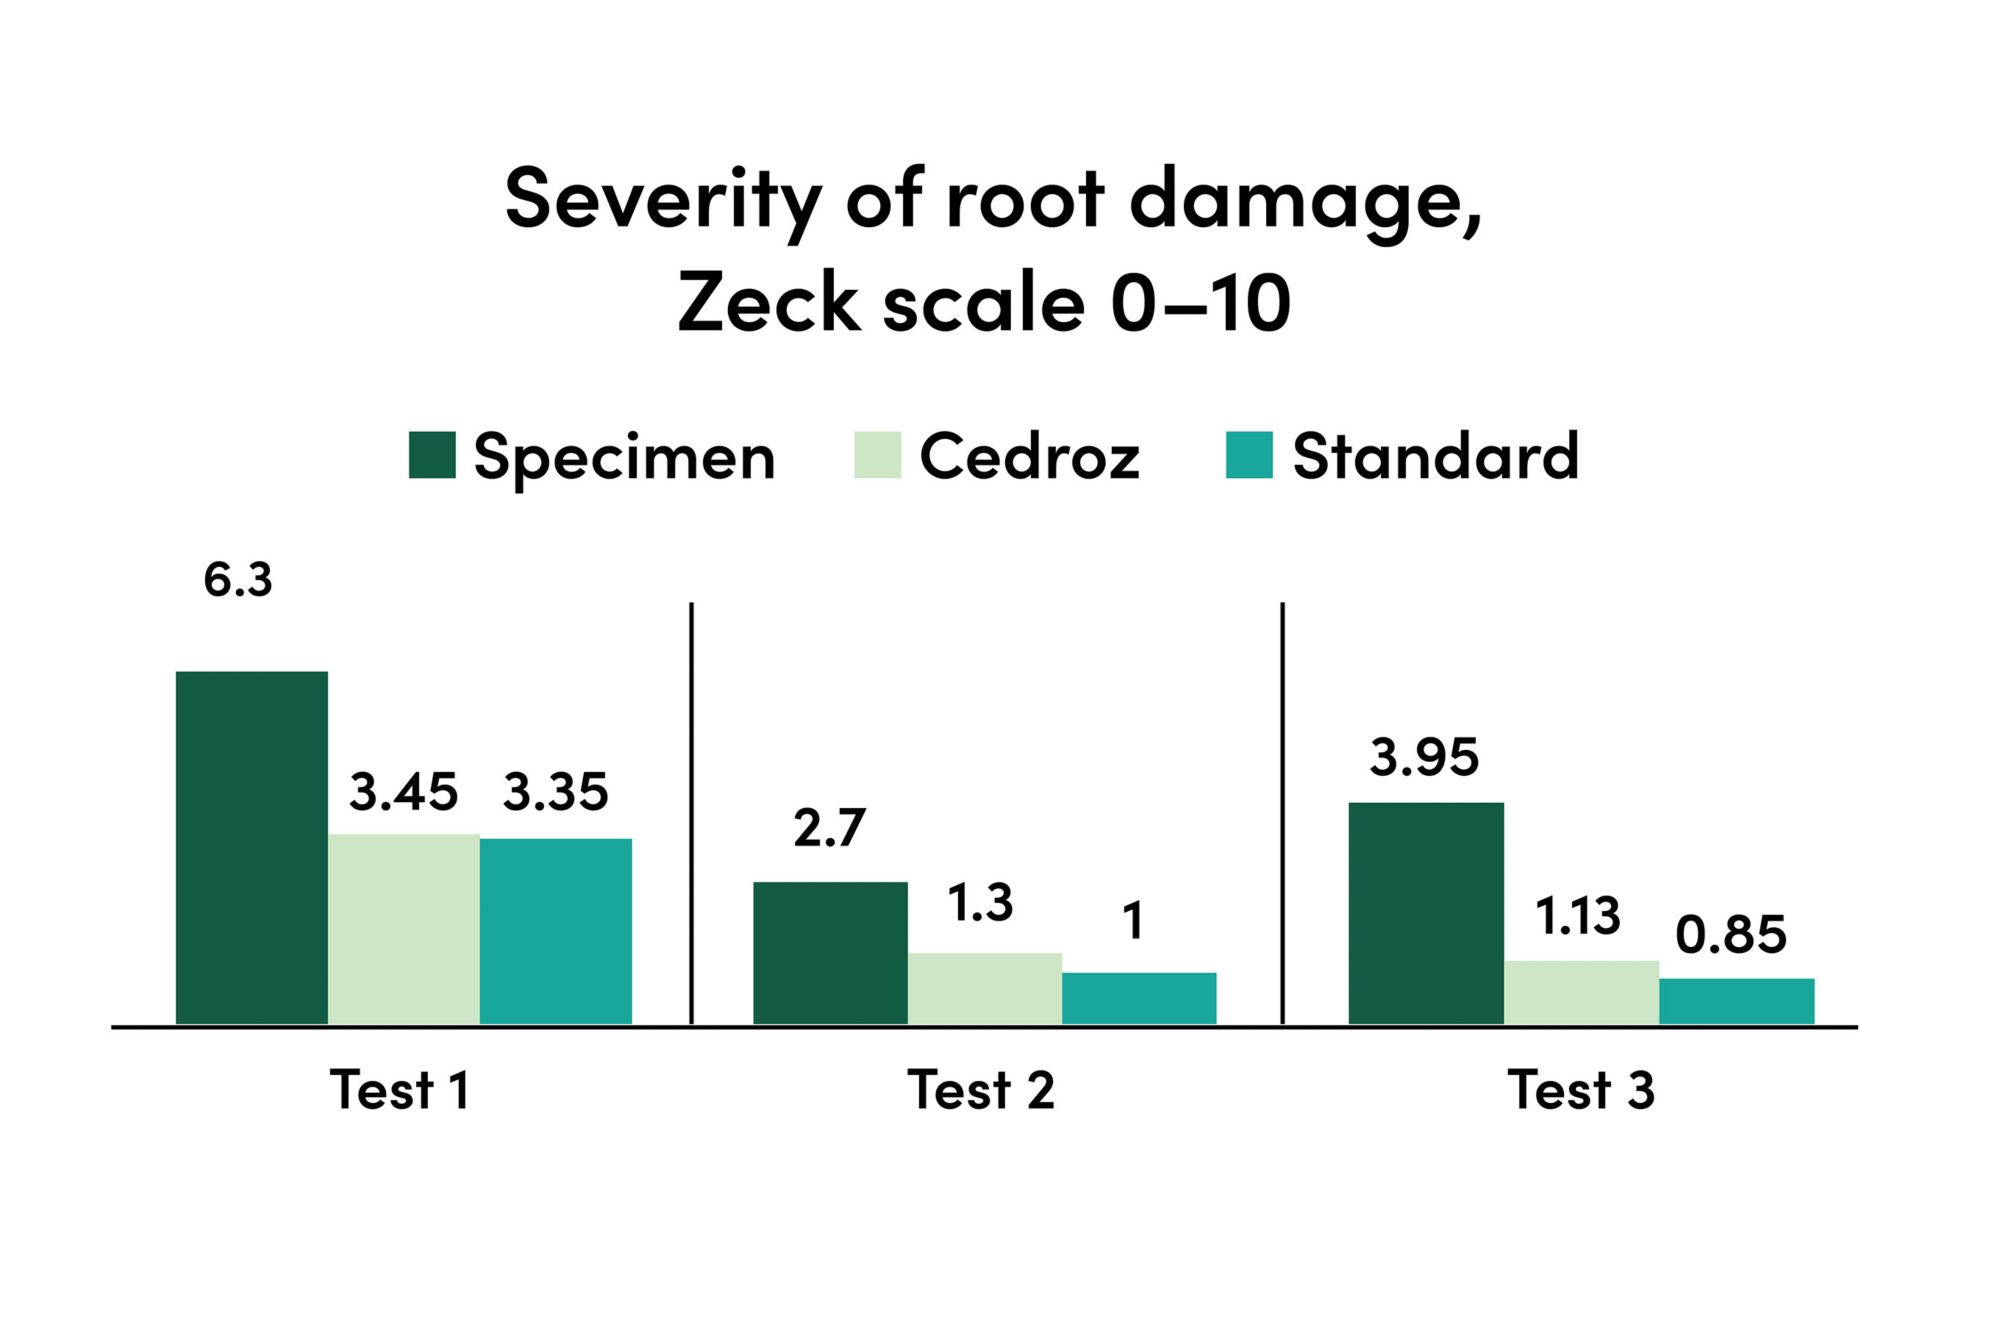 The graph compares root damage severity in tomatoes treated with a standard product versus Cedroz, showing similar performance 